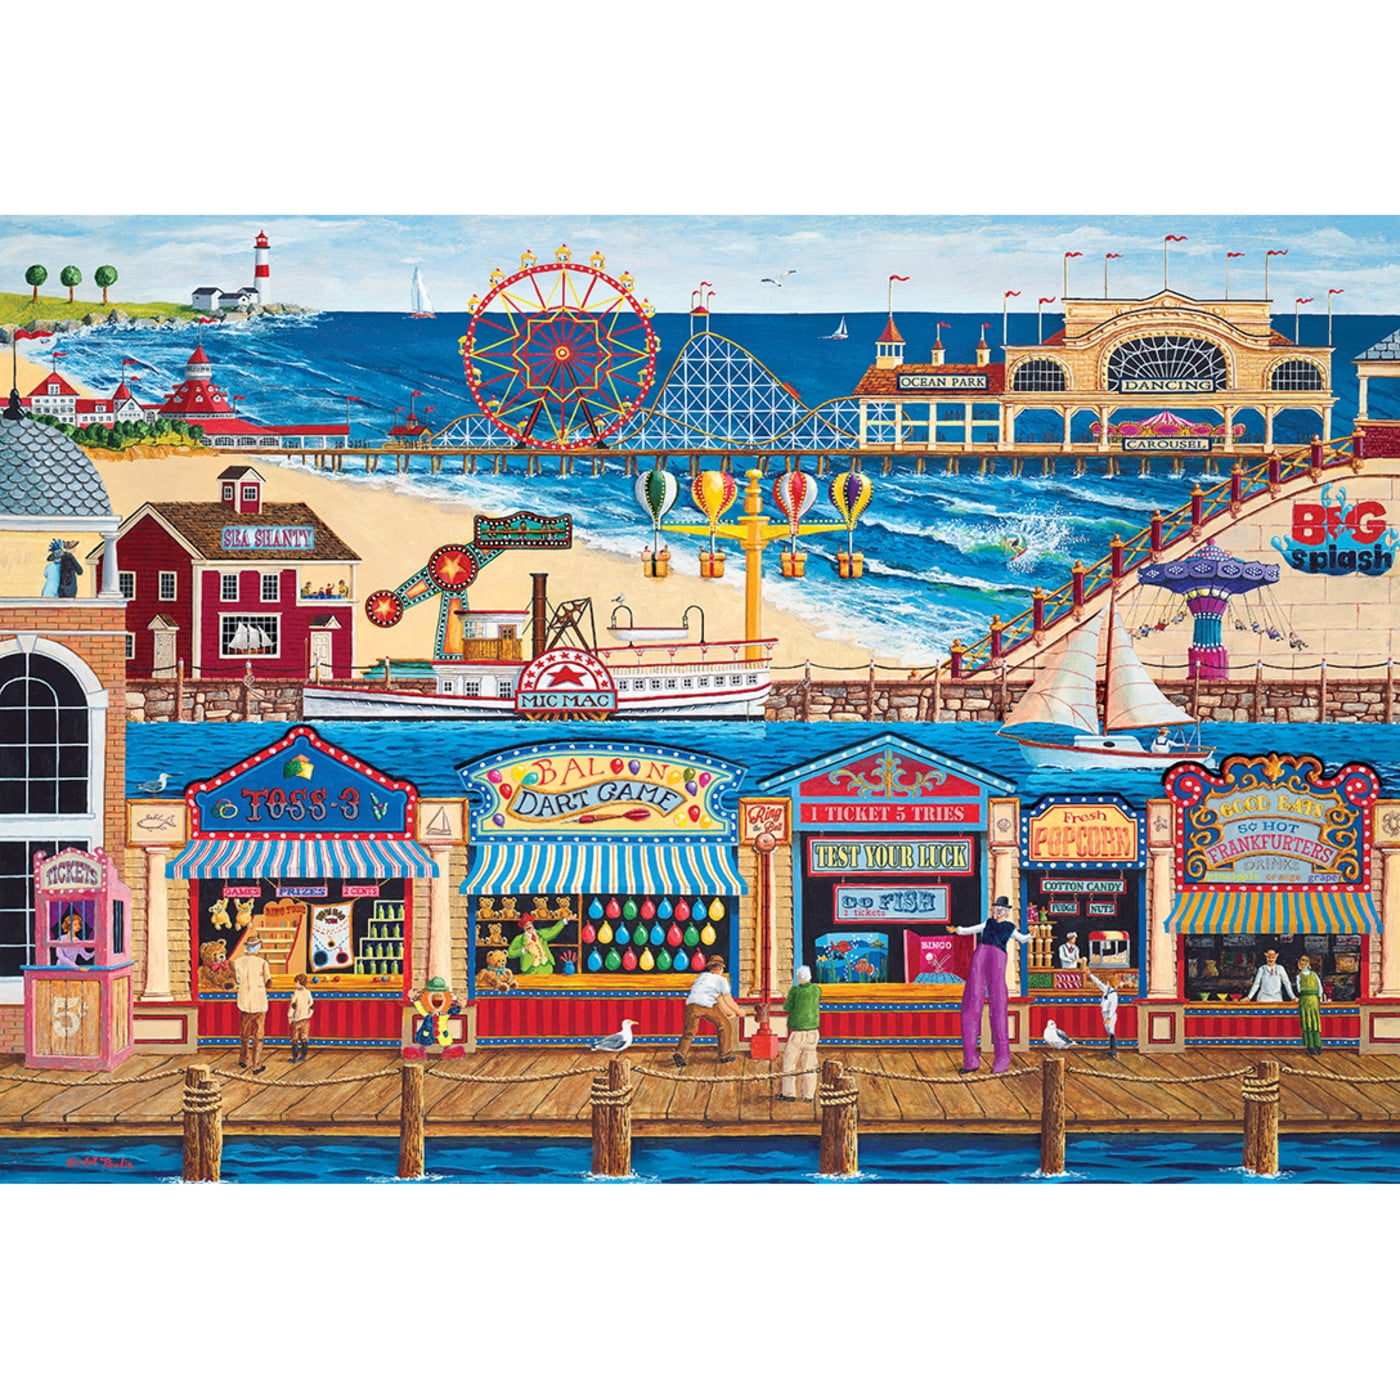 MasterPieces 2000 Piece Jigsaw Puzzle for Adults - Ocean Park - 39